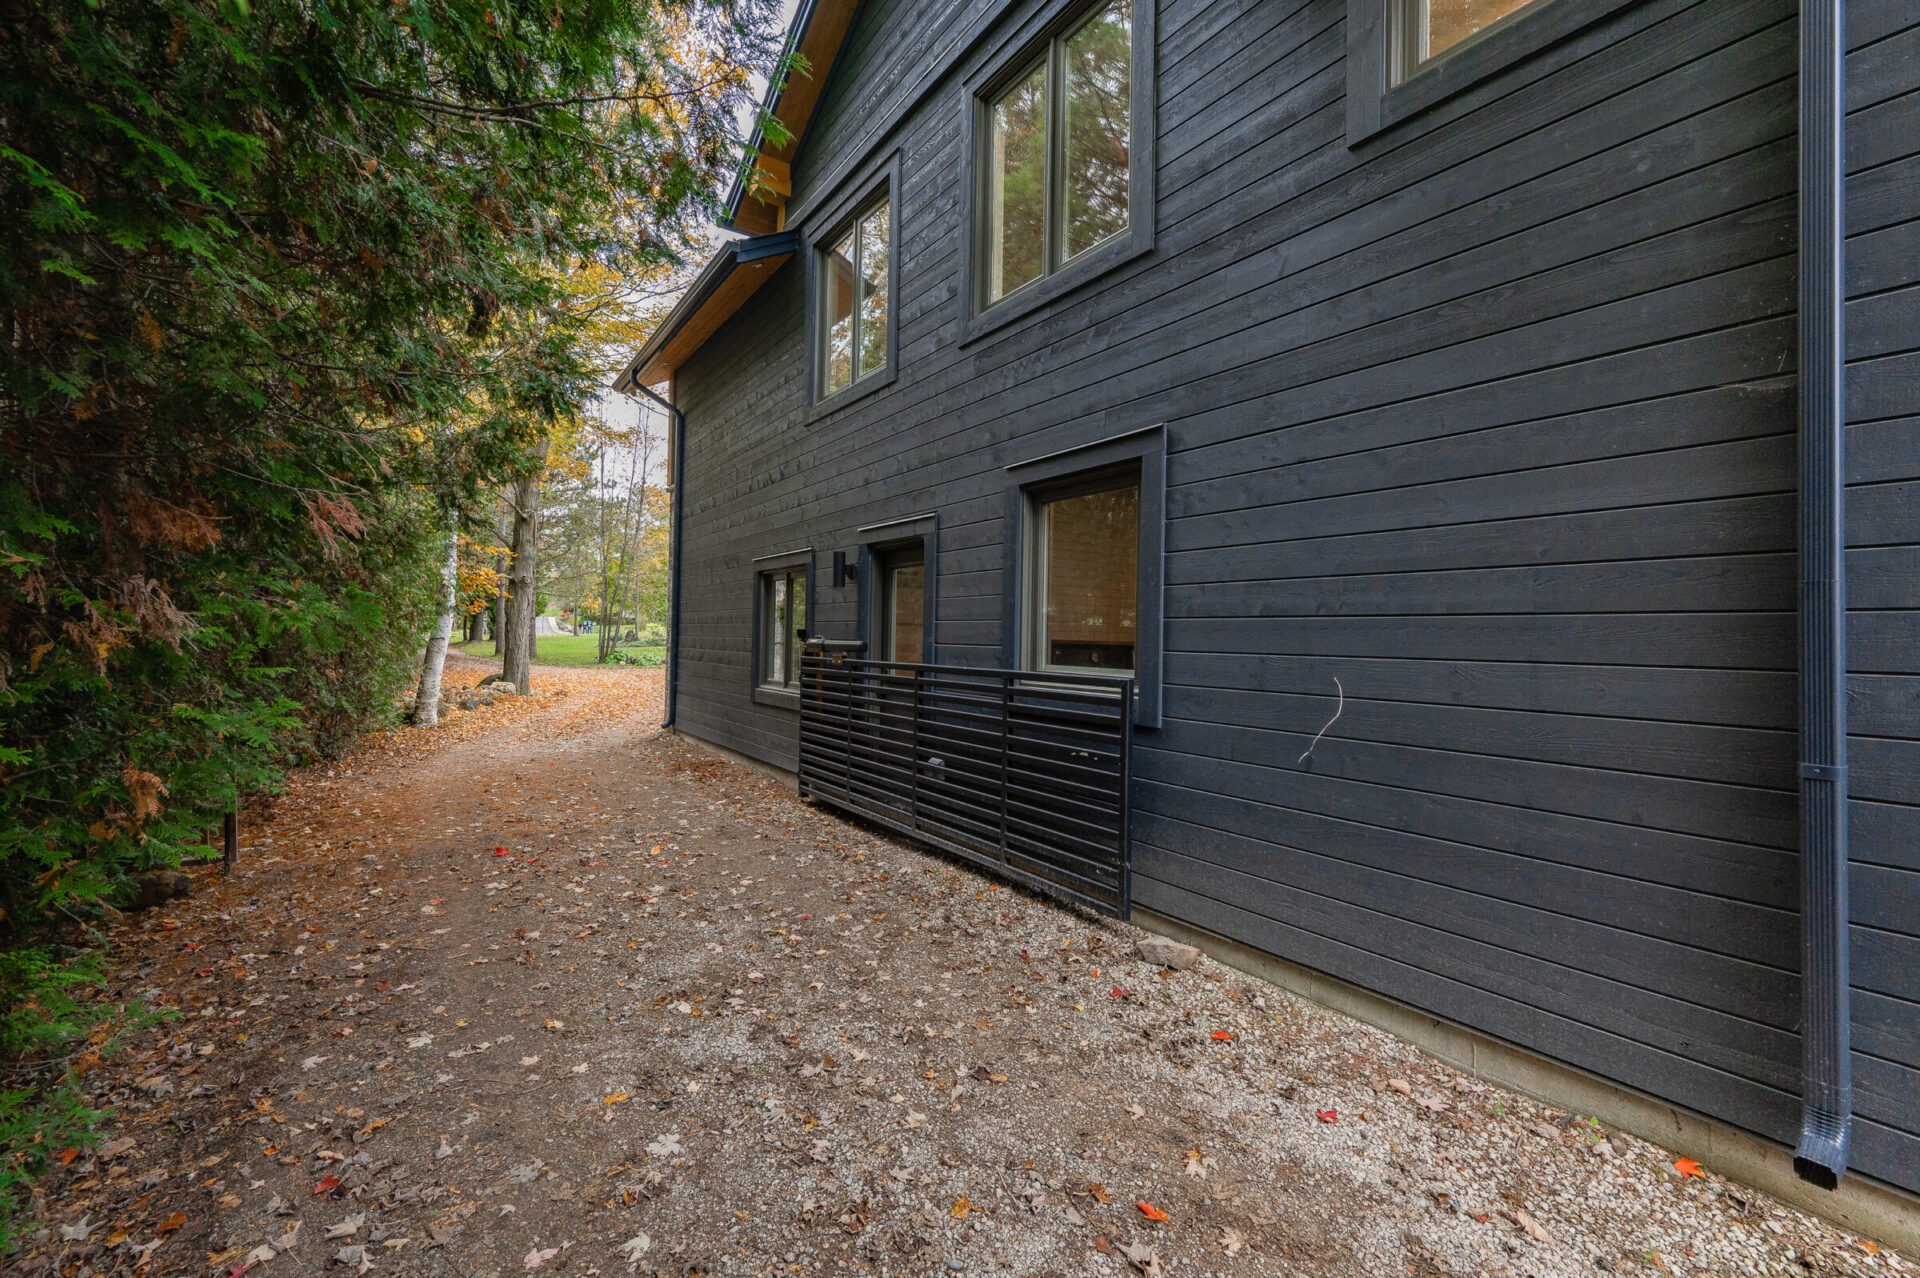 A modern two-story house with dark siding is shown next to a gravel path, surrounded by trees and scattered autumn leaves.